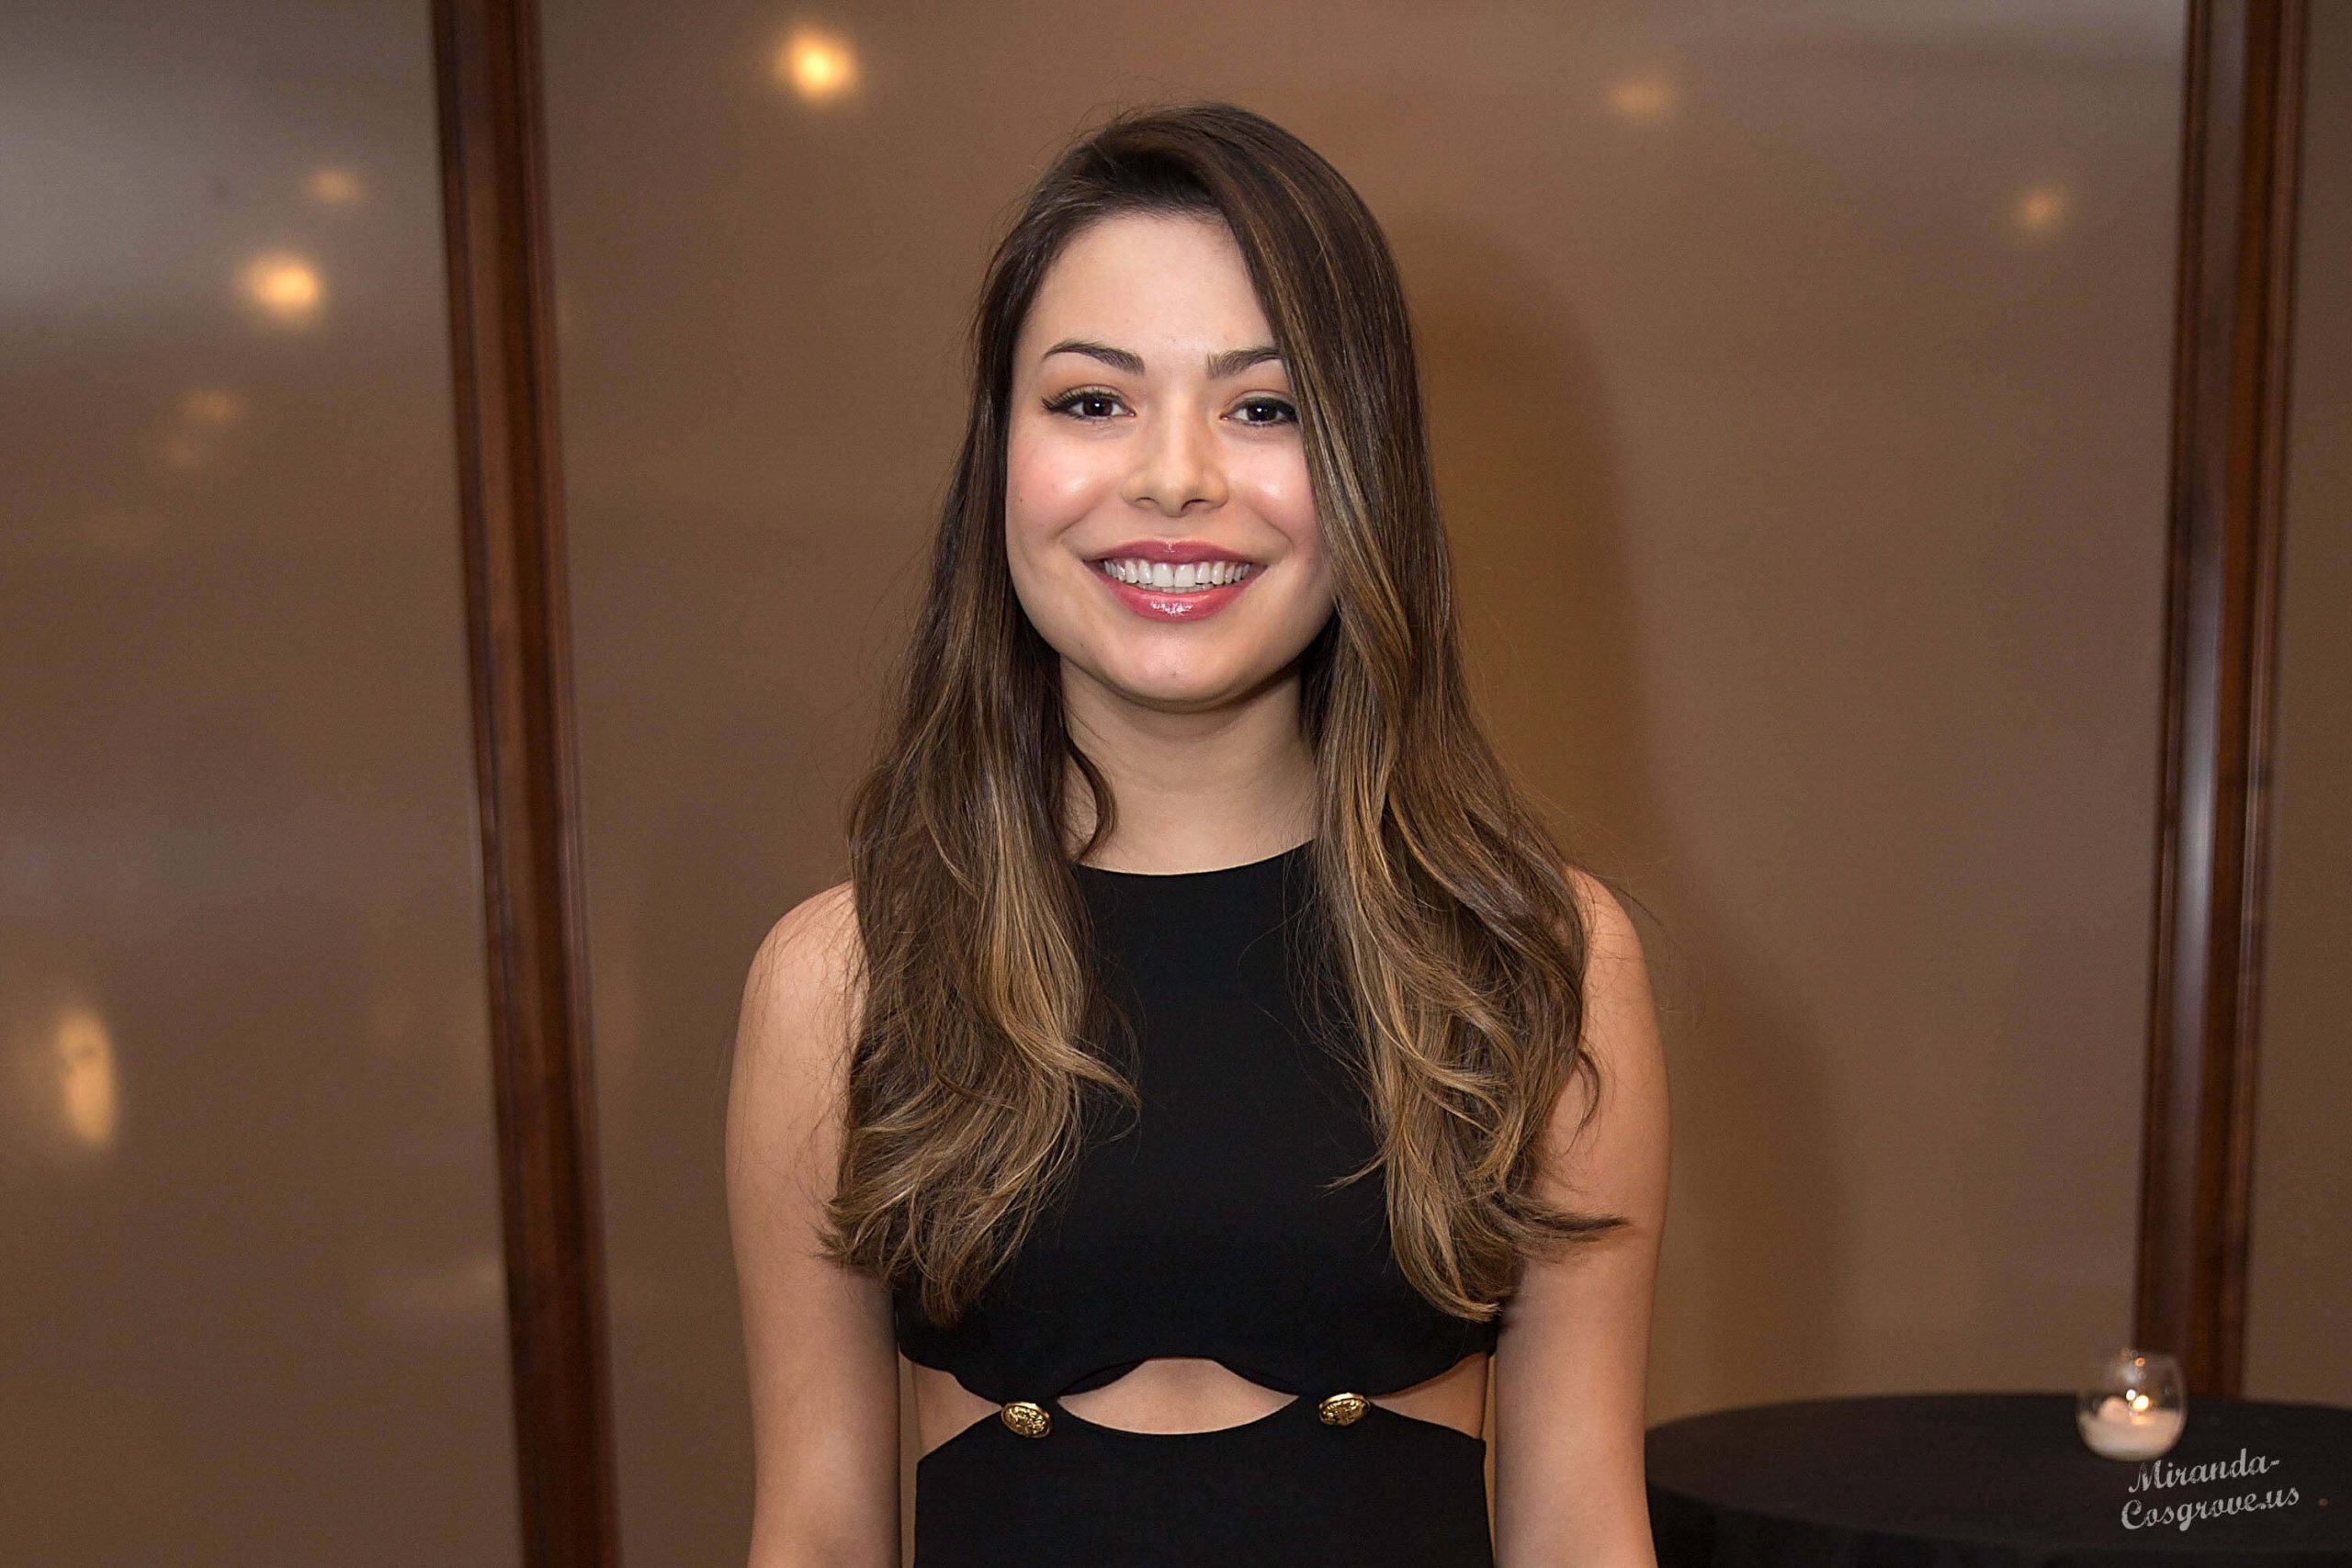 49 Miranda Cosgrove Nude Pictures Which Are Sure To Keep You Charmed With Her Charisma 23